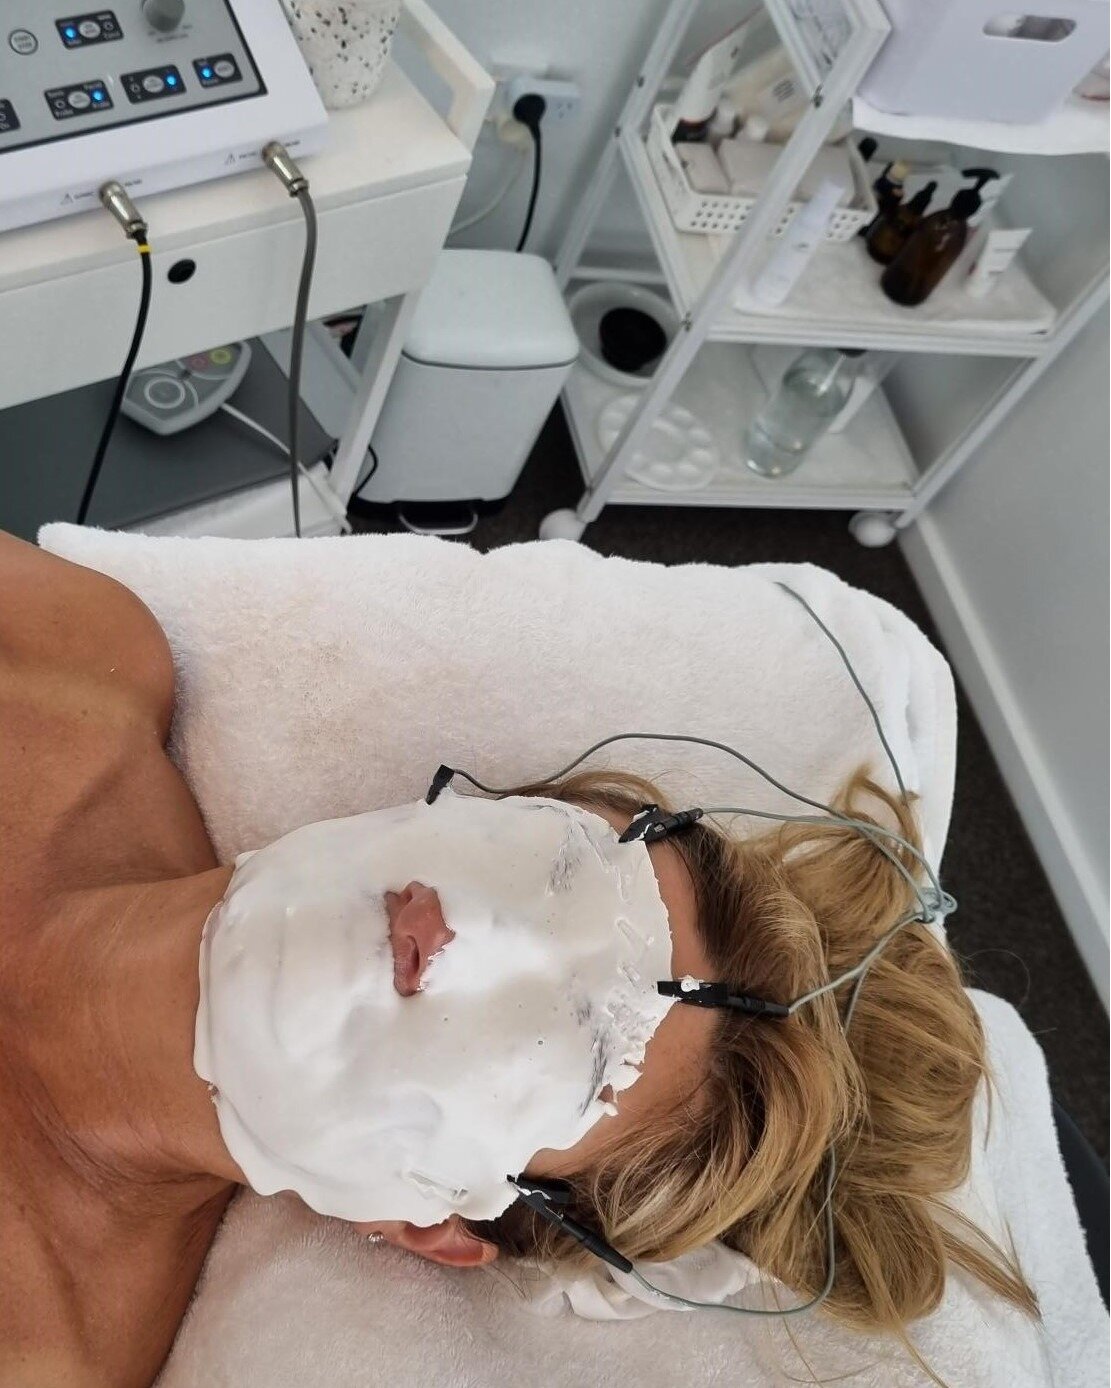 🌺 How devine! 💝💝💝
🌺 It was my turn to be pampered, revived and restored today with an Environ Electro-Sonic DF Vitamin Infusion Facial!
🌺 An absolutely essential treatment to help return my skin back to smooth, hydrated and radiant after all th